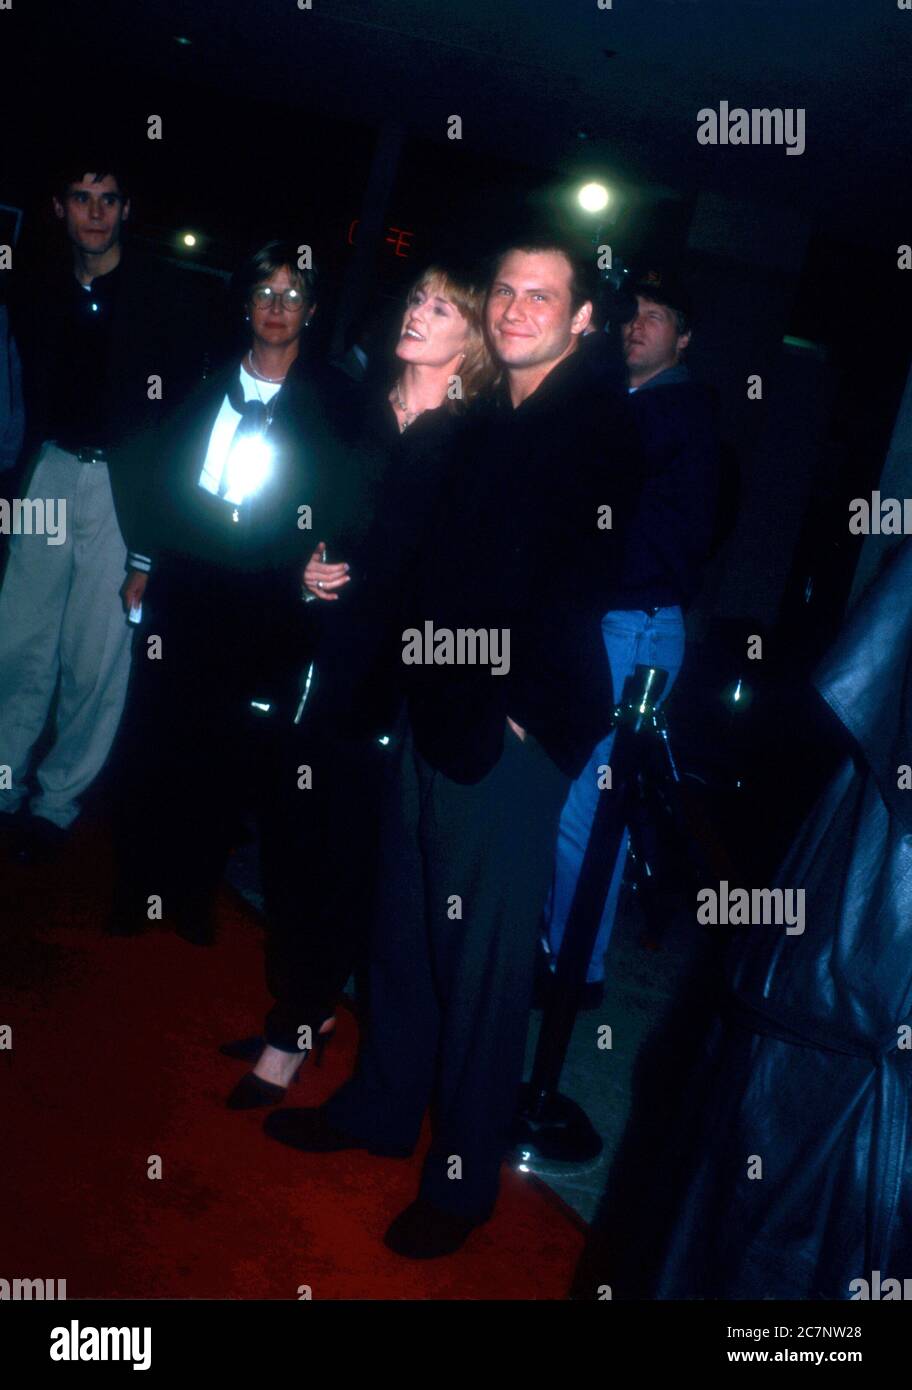 Century City, California, USA 18th January 1996 Actress Mary Stuart Masterson and actor Christian Slater attend New Line Cinema's 'Bed of Roses' Premiere on January 18, 1996 at Cineplex Odeon Century Plaza Cinemas in Century City, California, USA. Photo by Barry King/Alamy Stock Photo Stock Photo